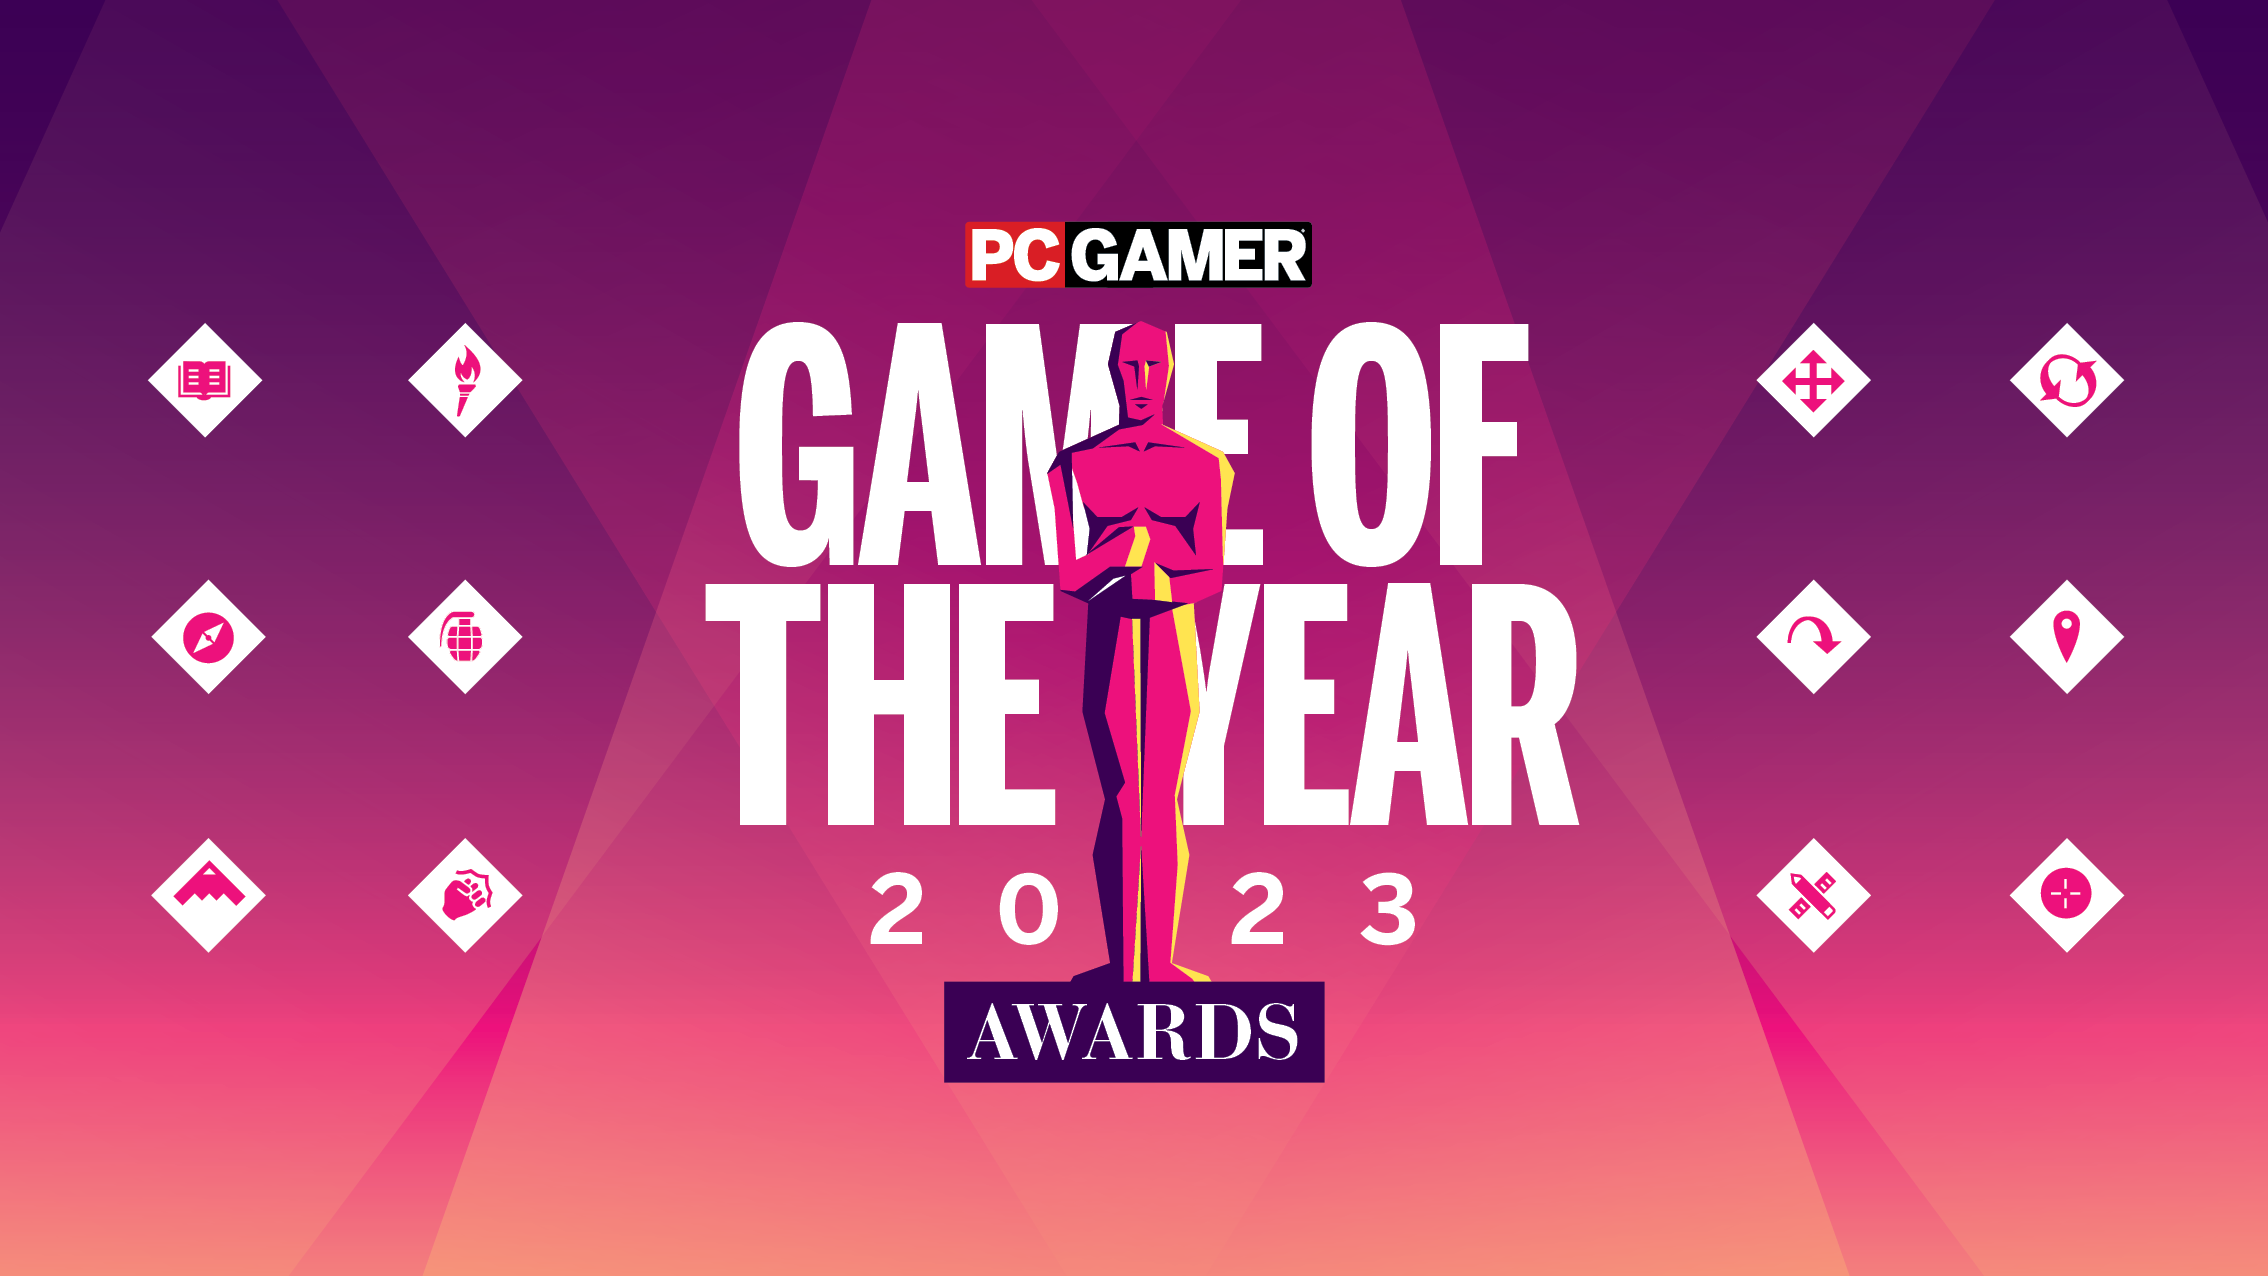 VGAs Out, The Game Awards 2014 In